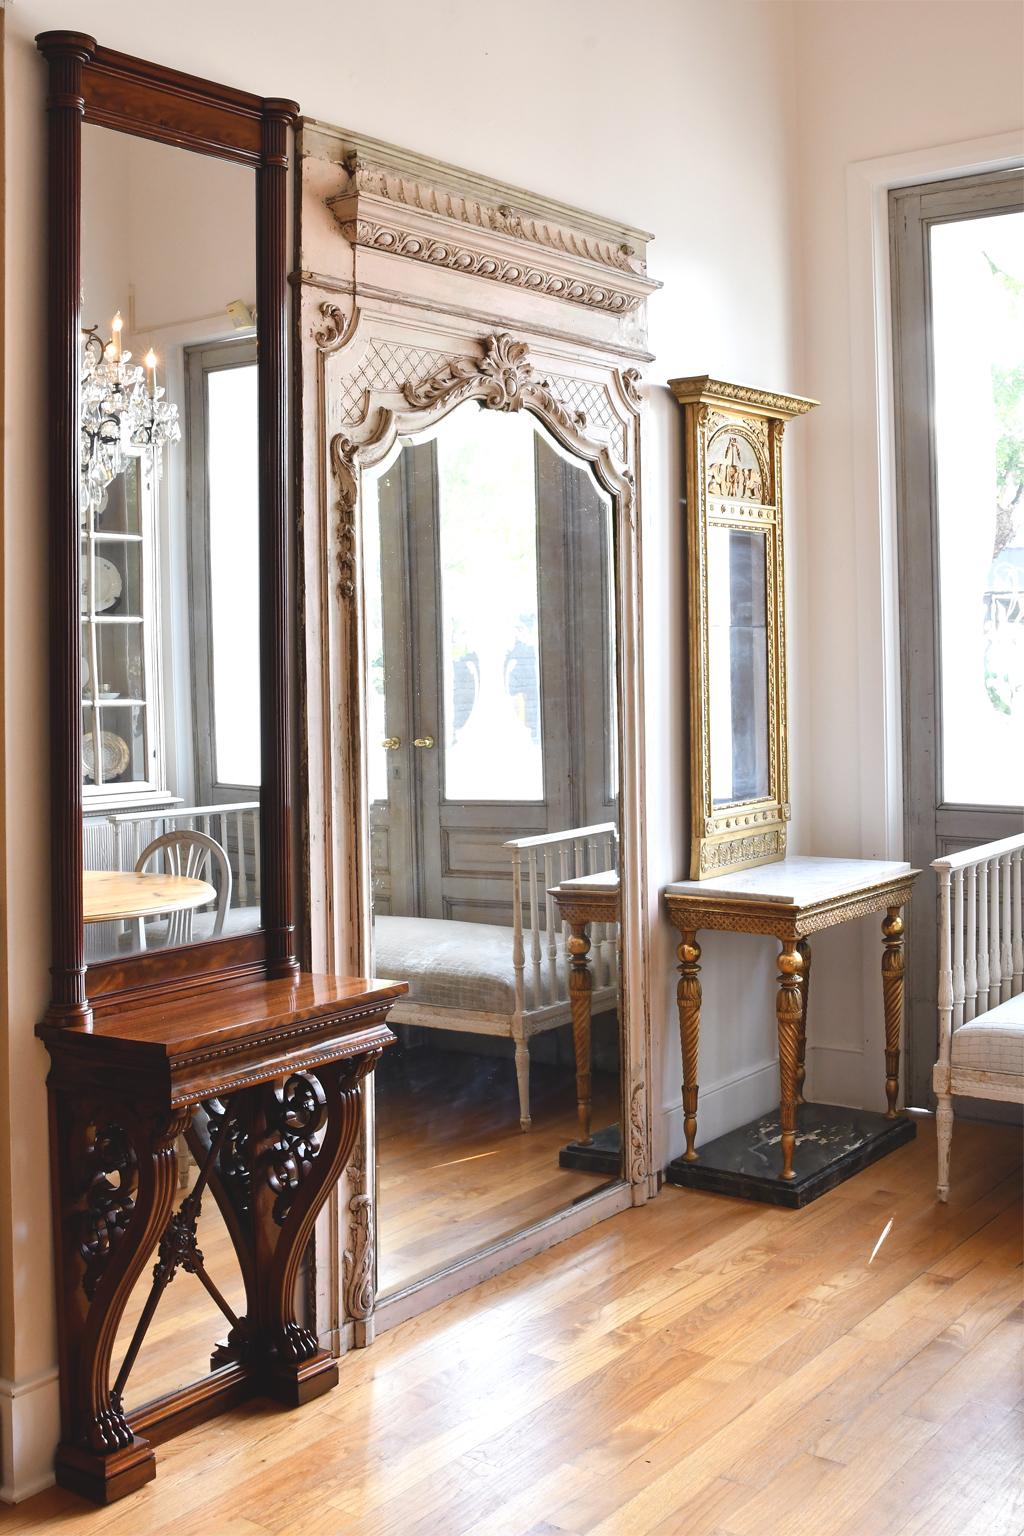 A very lovely French trumeau mirror in carved and painted wood with white distressed finish. France, circa 1880. Originally part of a paneled room, this Louis XVI style trumeau mirror has an imposing presence with a height of 104